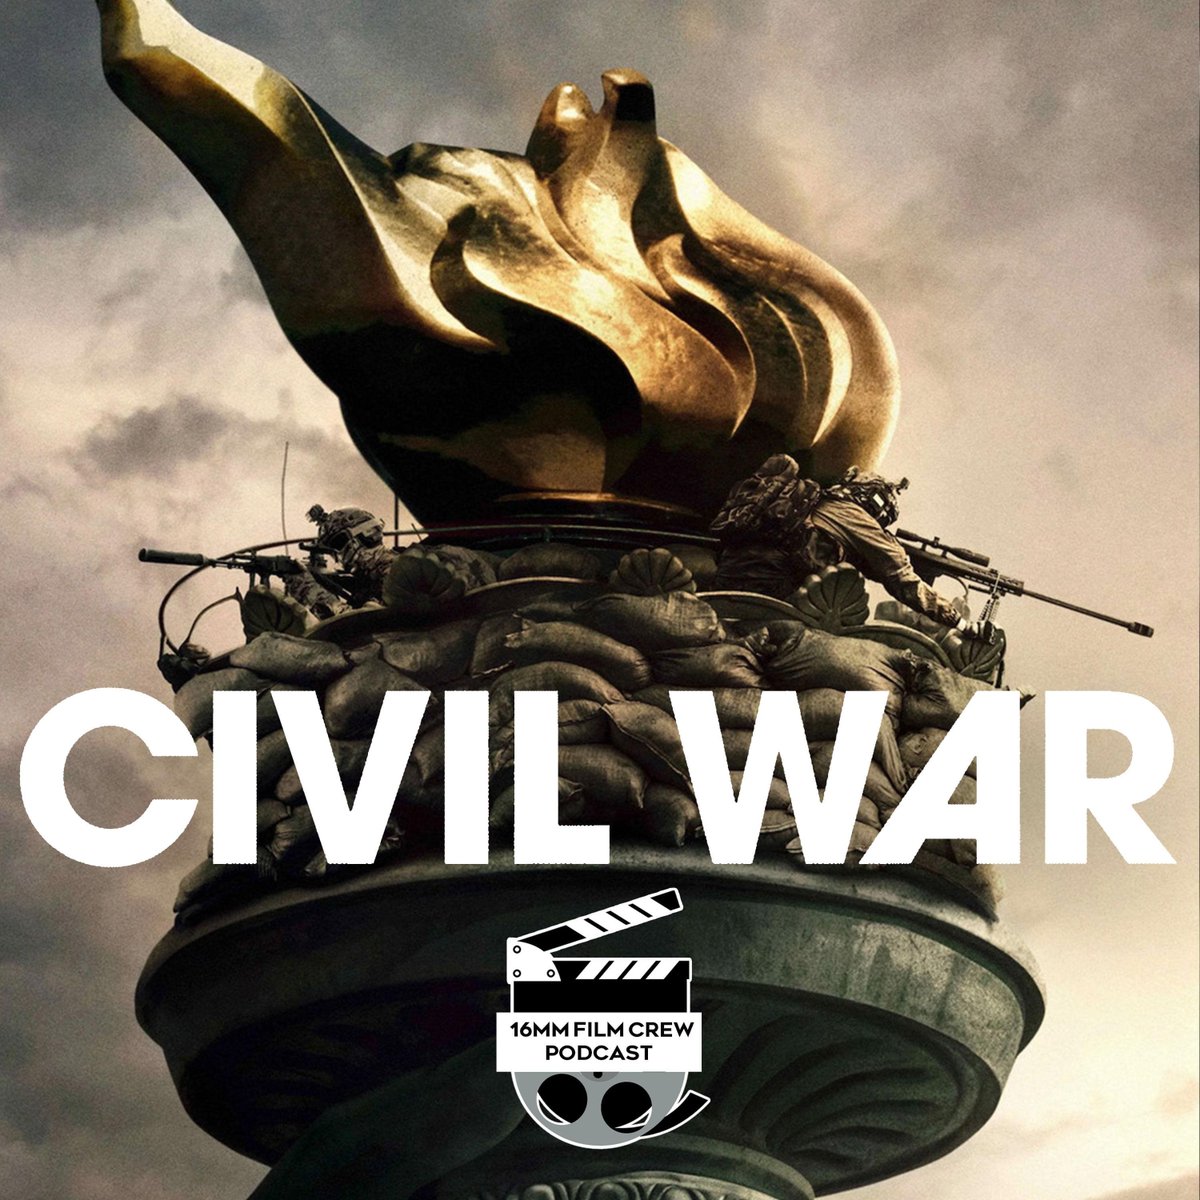 This week we review A24's big budget gamble, Alex Garland's #CivilWar. We also discuss some recent trailers and Cinema-Con news. 

iTunes: buff.ly/30MQ81A 
Spotify: buff.ly/49c0r1a 

#PodernFamily #PodNation #podsincolor